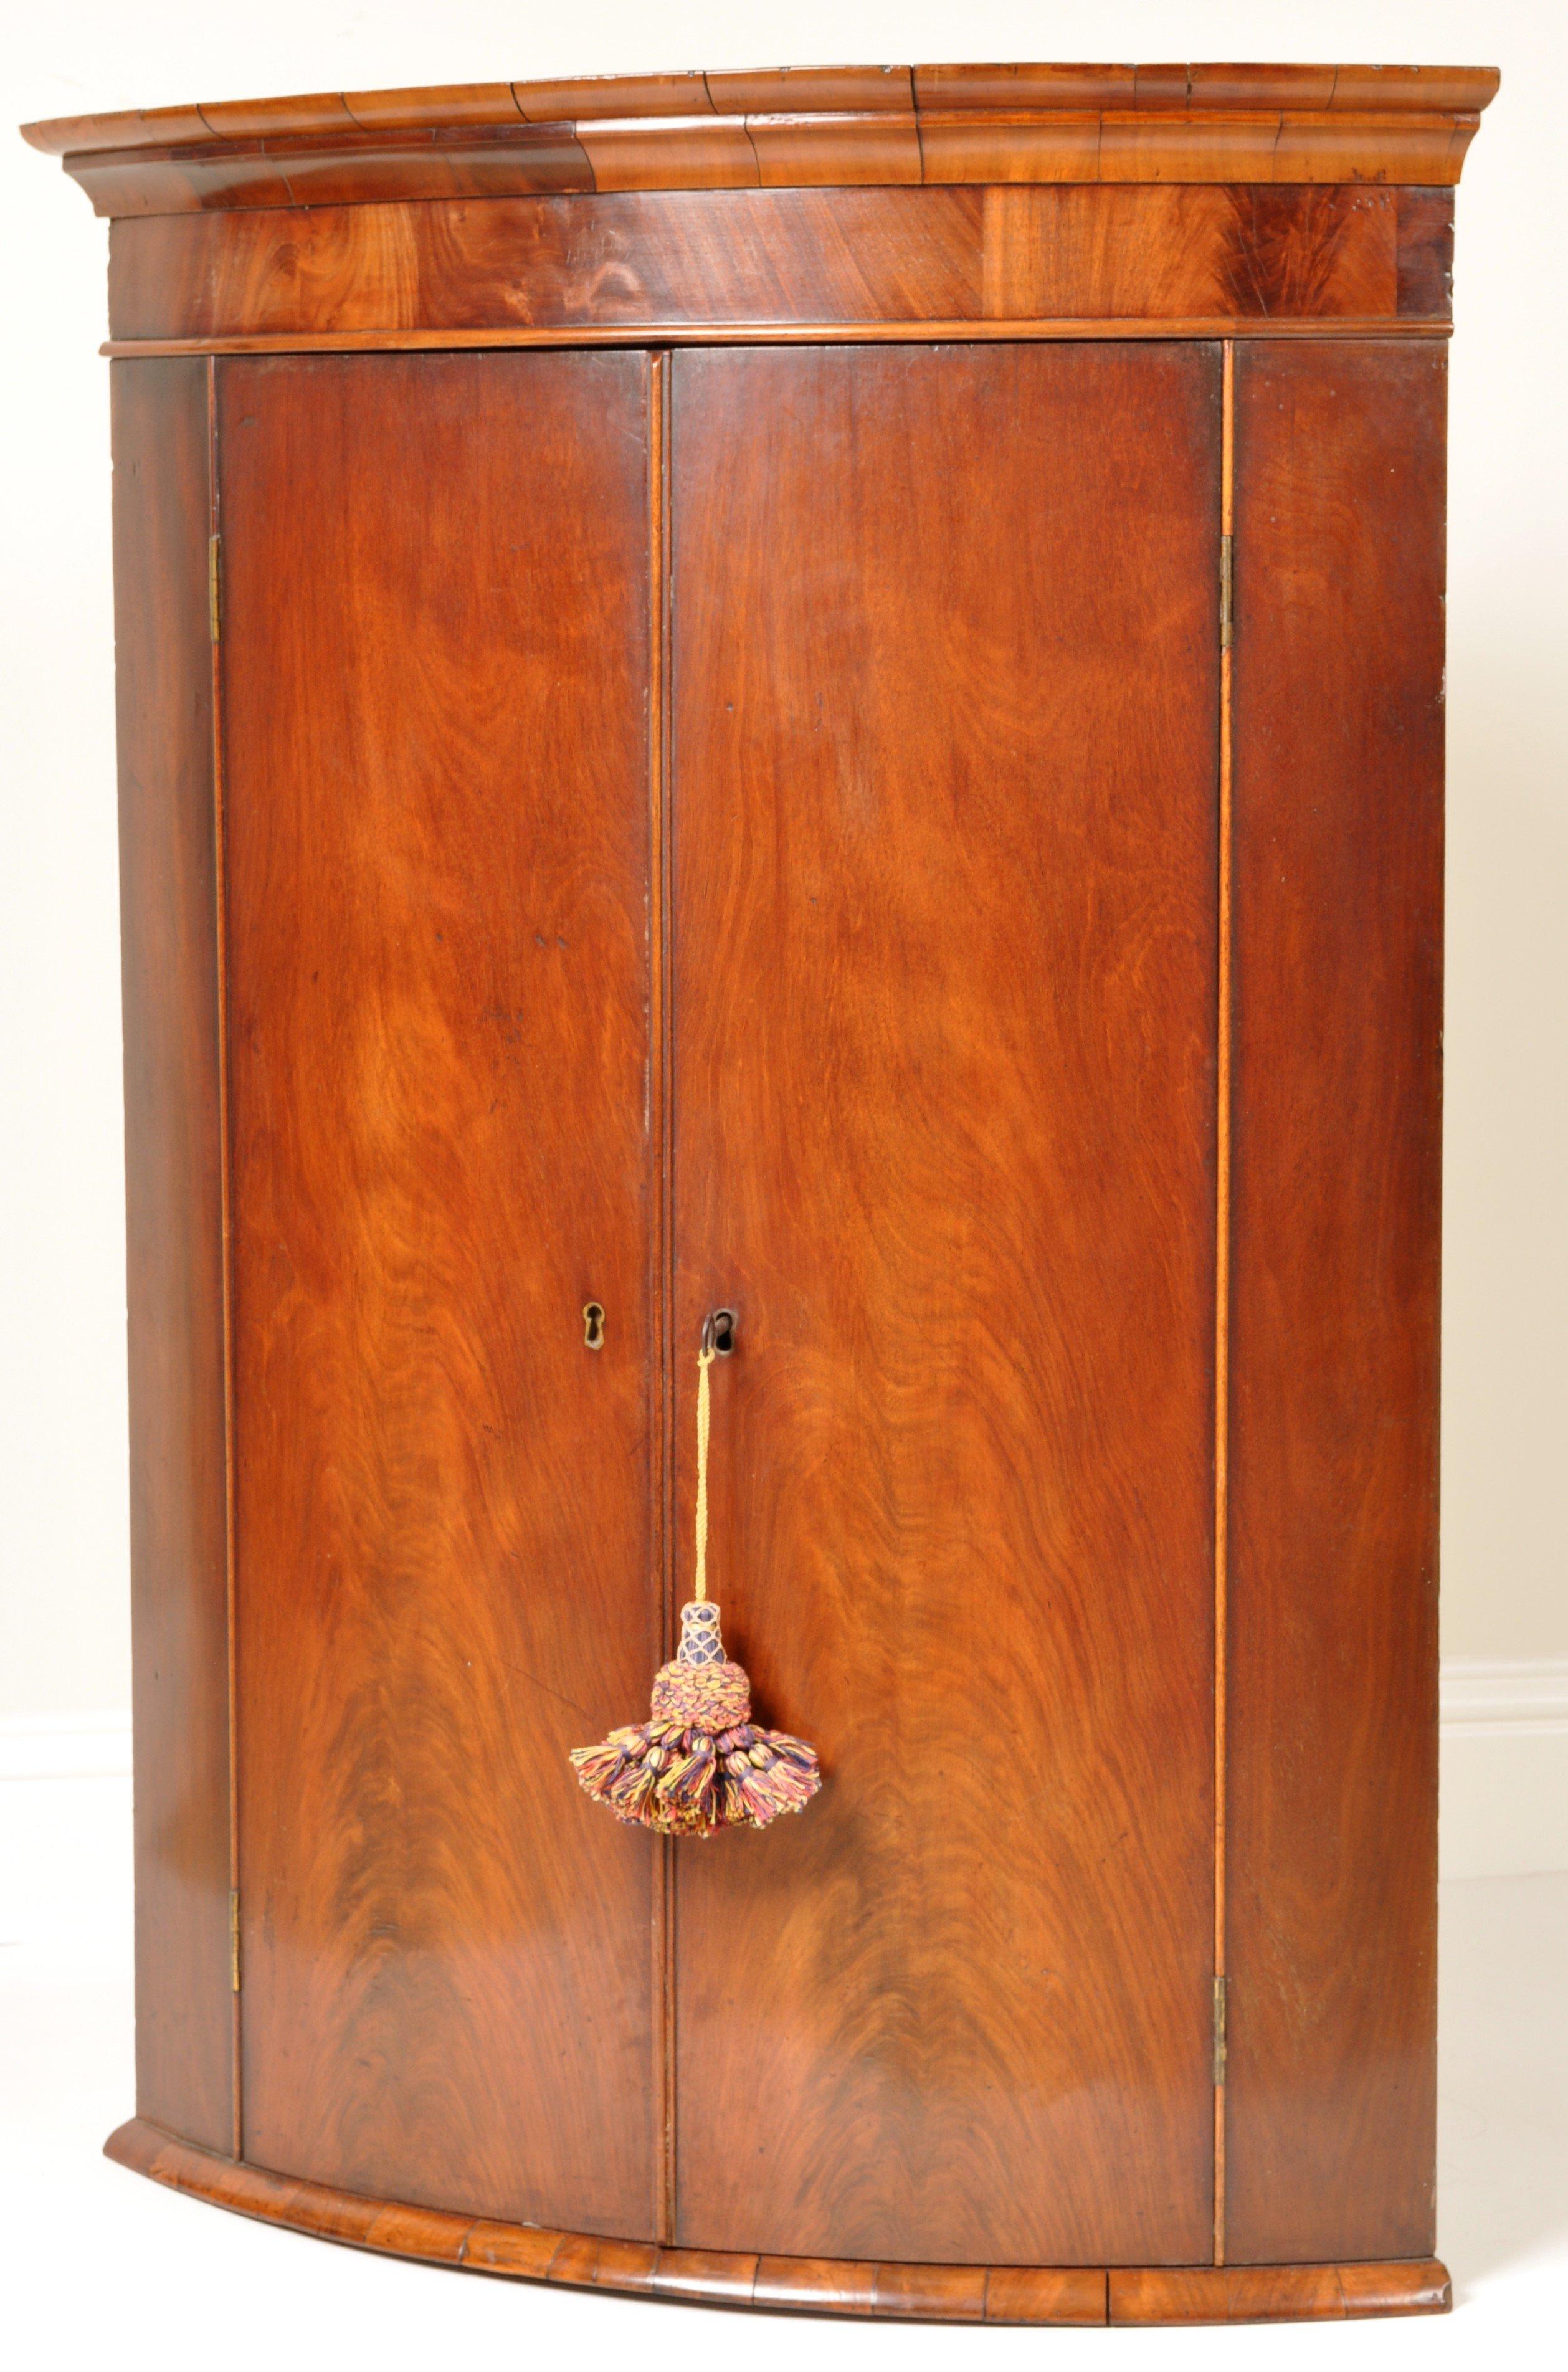 Late 18th Century Antique English Georgian Flame Mahogany Bow-Fronted Corner Cabinet, circa 1780